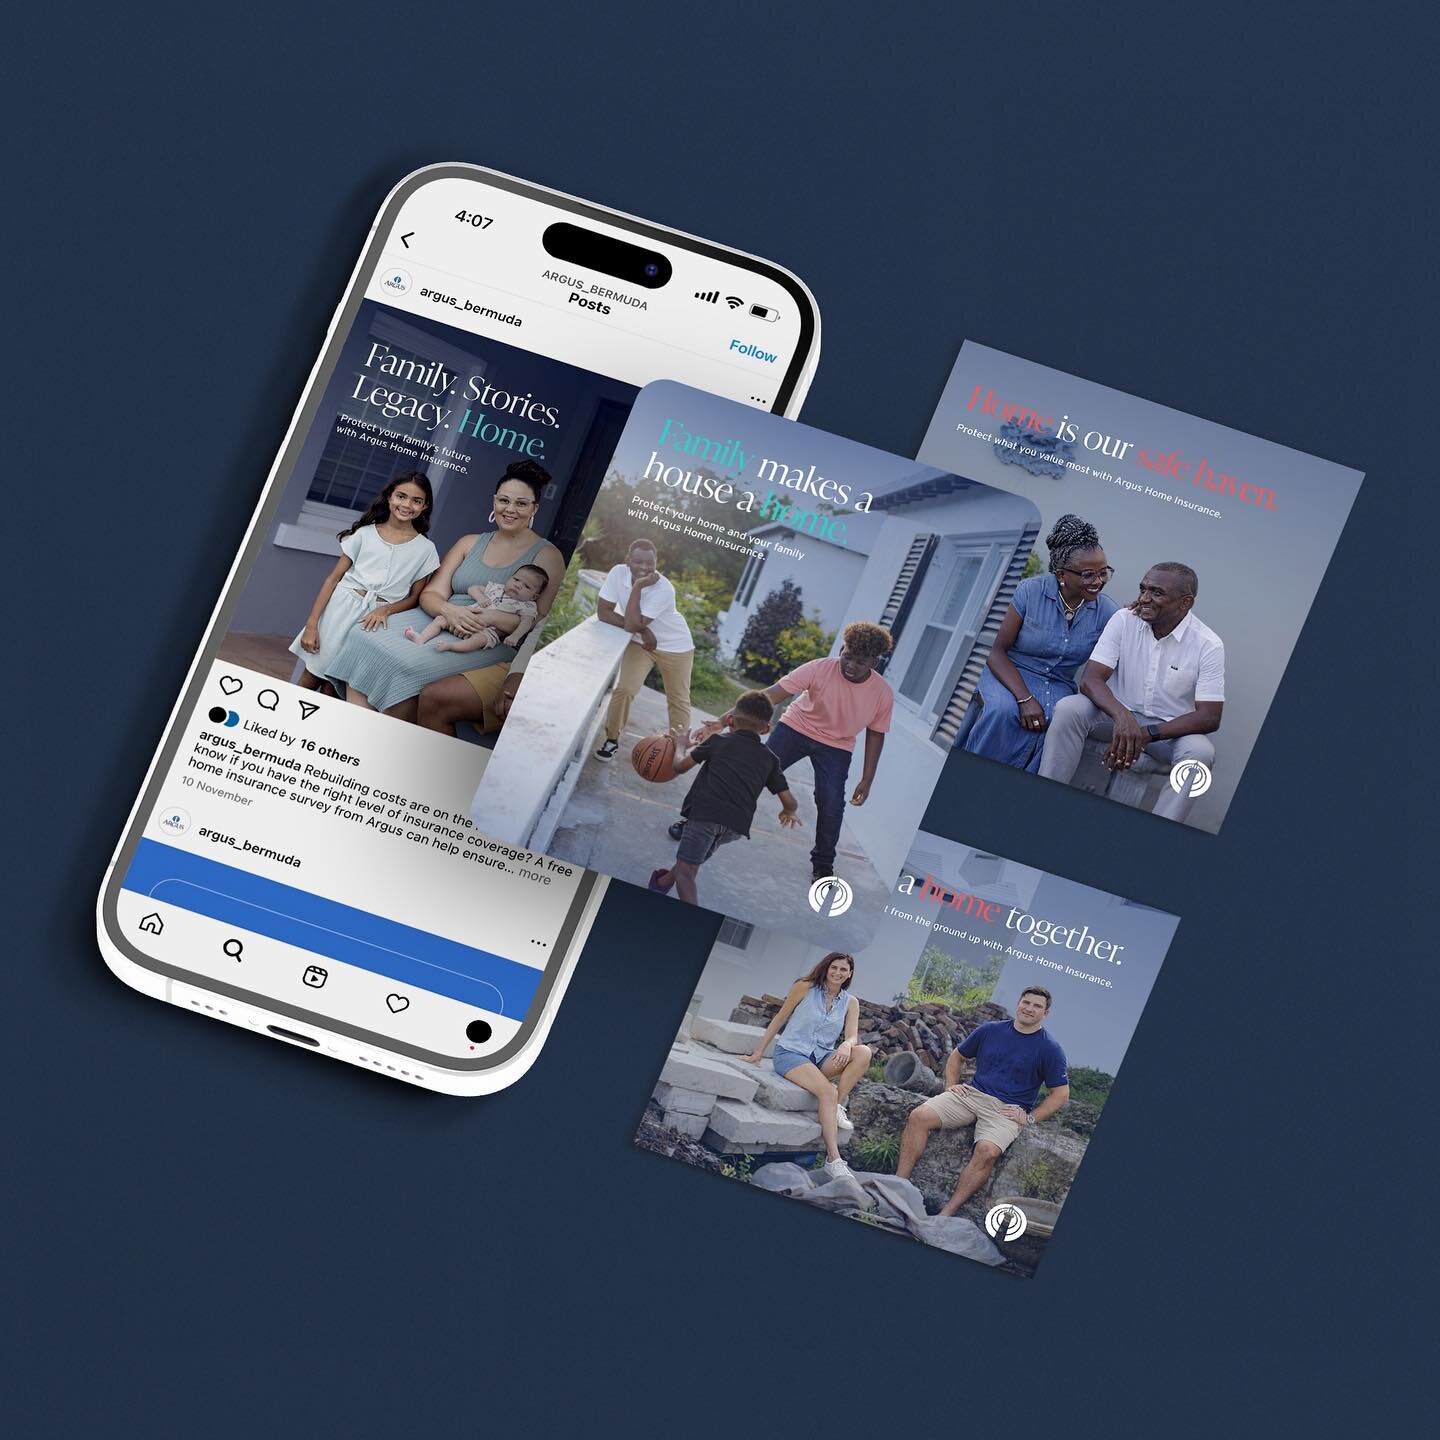 Social media ads for @argus_bermuda 

Utilizing captivating, authentic imagery captured by local photographer @meredithphoto of Bermudian families, the campaign aims to highlight the Argus customer.

The overall campaign reinforces the Argus mission 